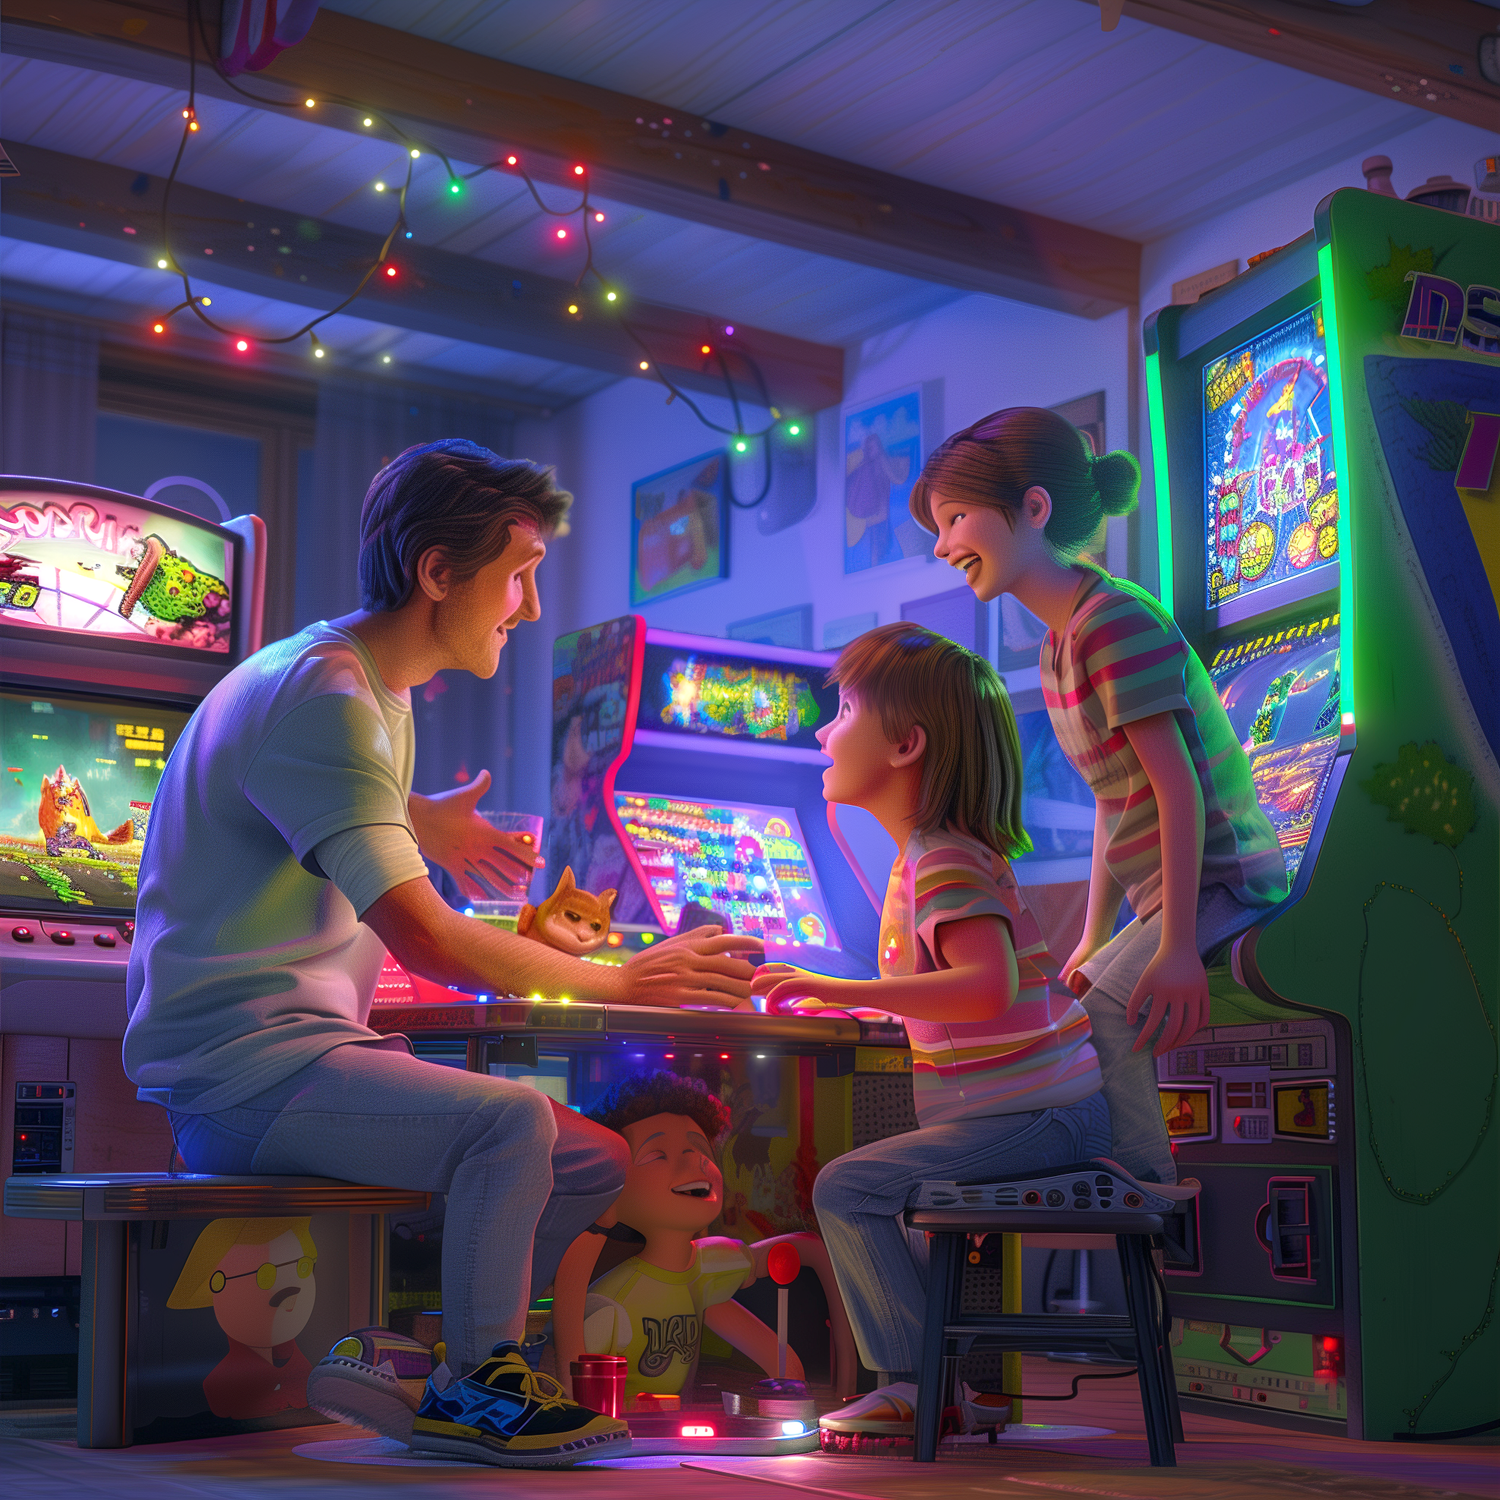 Pixar style animation of a joyful family sitting, playing an arcade game together